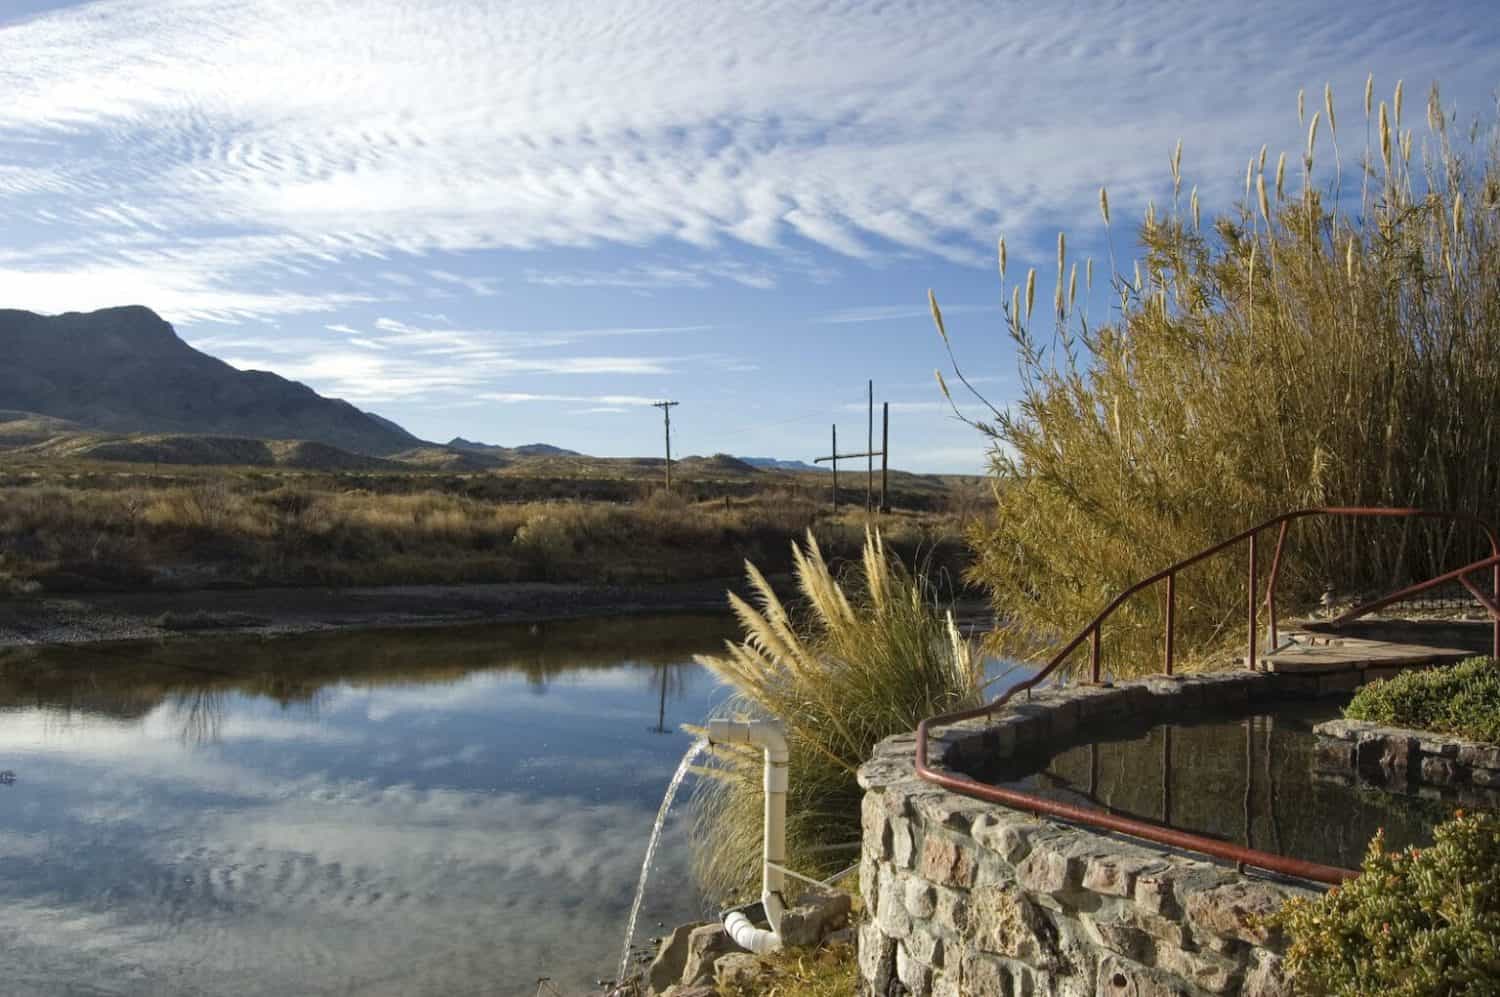 The Riverbend Hot Springs spa, photo courtesy of wandernewmexico.com